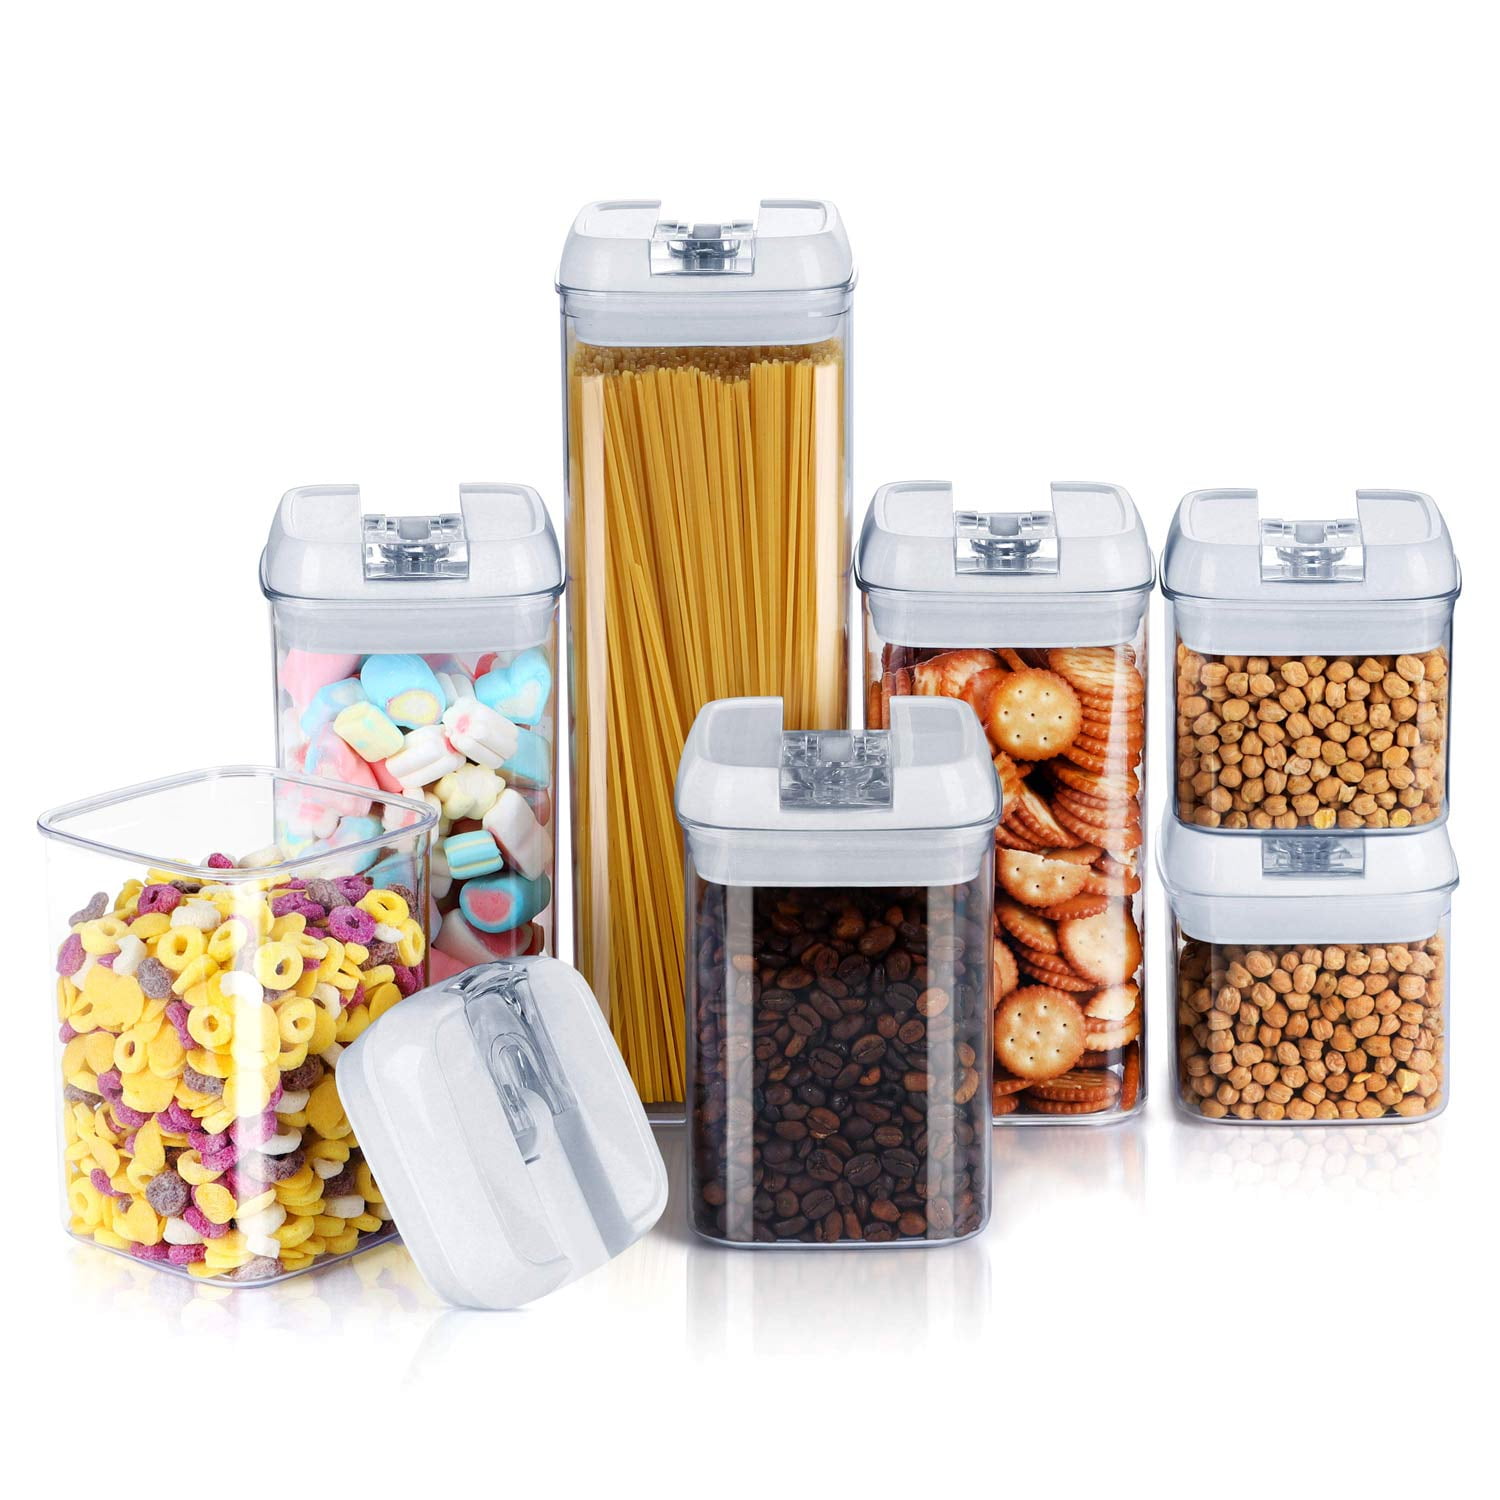 PRAKI 5PCS Cereal Containers Storage Set, BPA Free Airtight Food Storage  Container Set with Lids, Kitchen Pantry Organization and Storage for Sugar